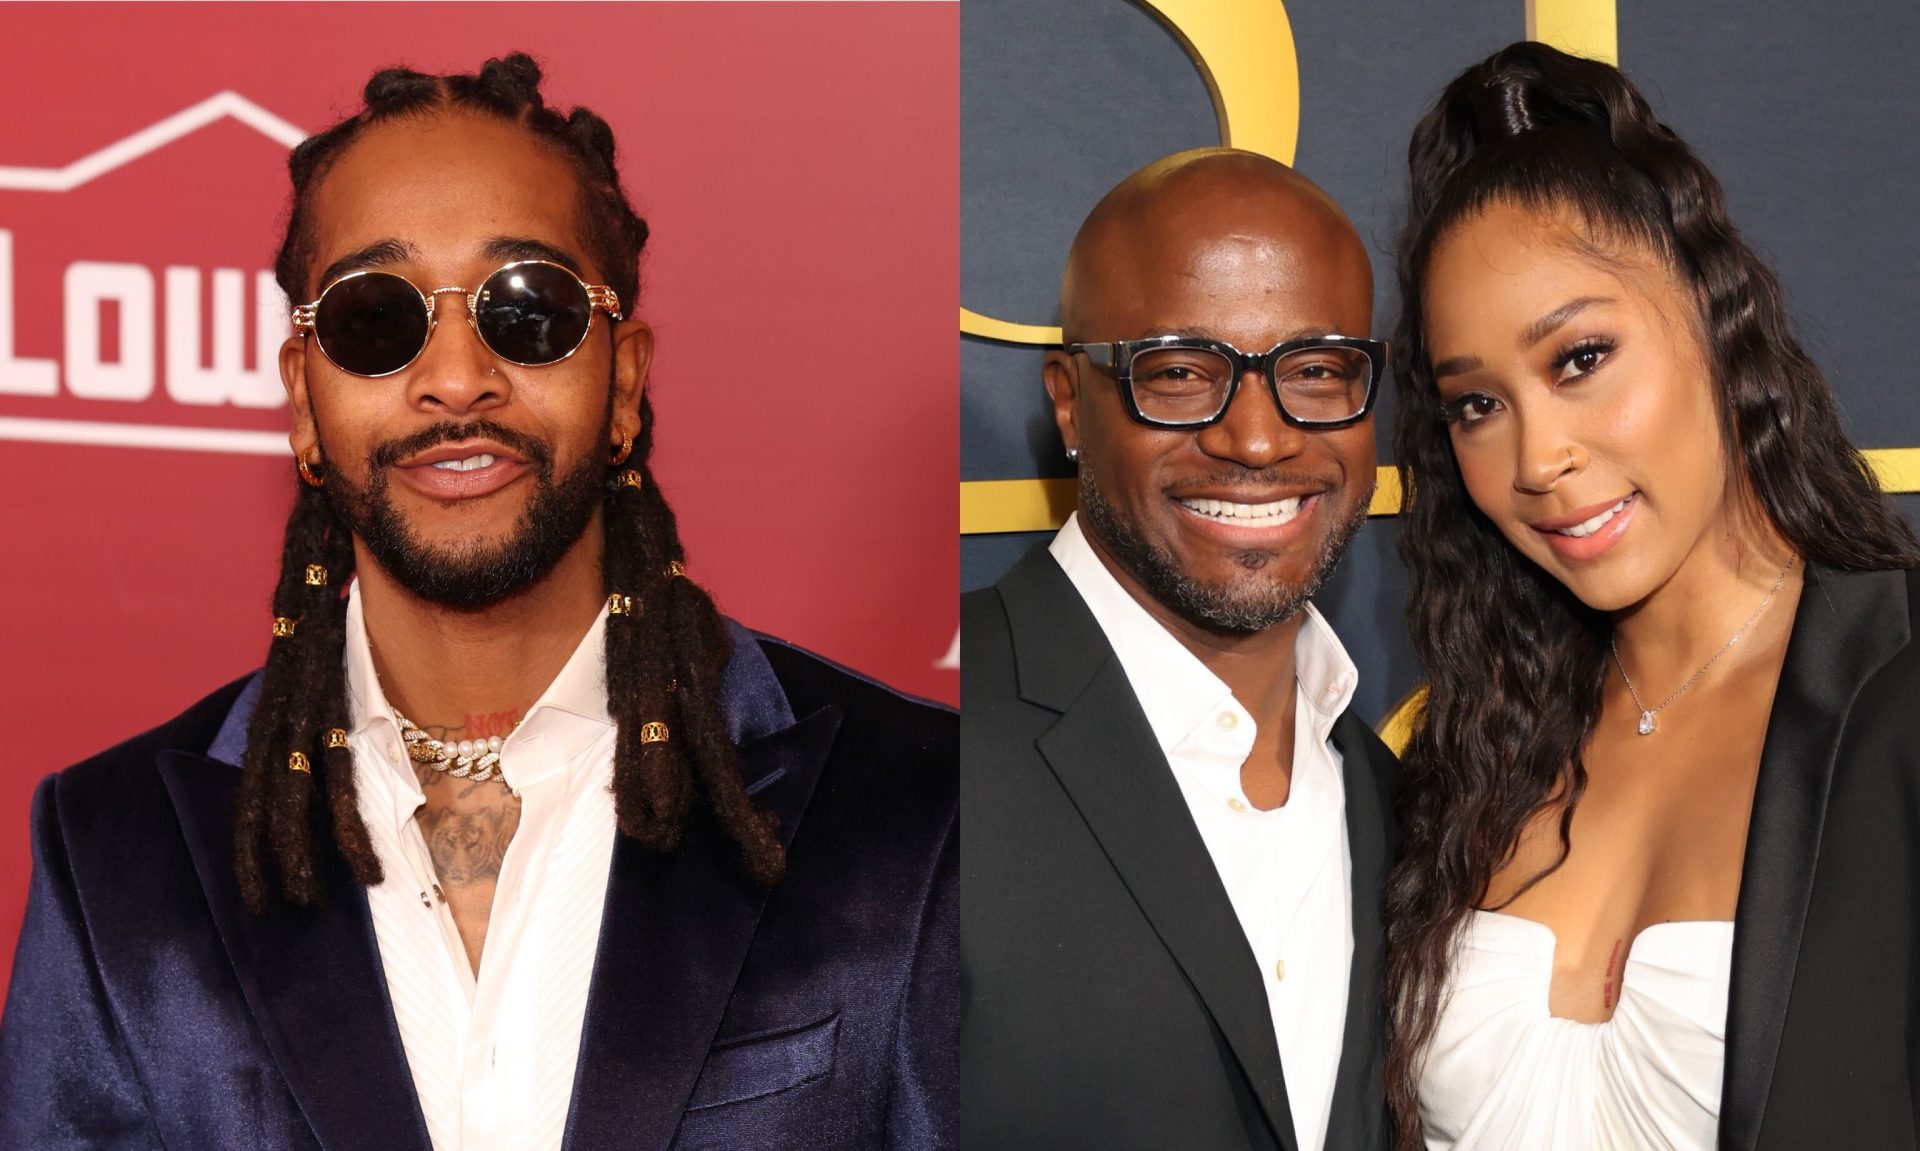 Omarion Talks About Meeting Apryl Jones’ Boyfriend Taye Diggs For The First Time: ‘It Was Cool’